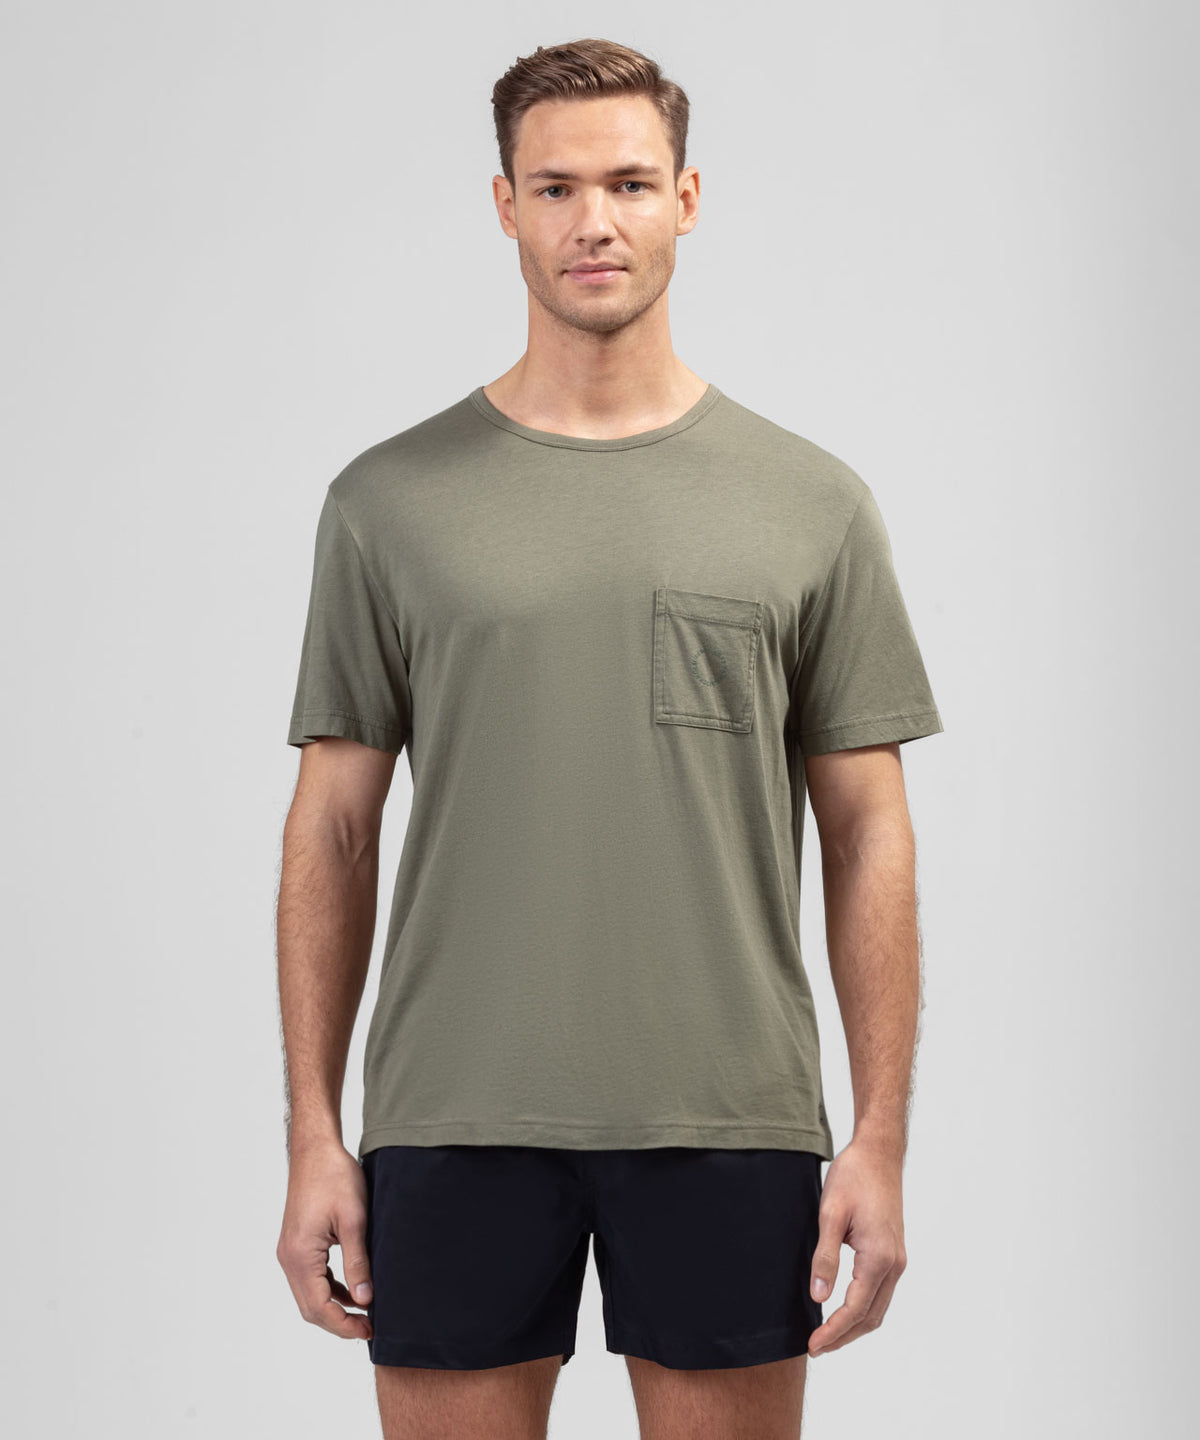 Cotton Modal T-Shirt w Chest Pocket: Olive Green